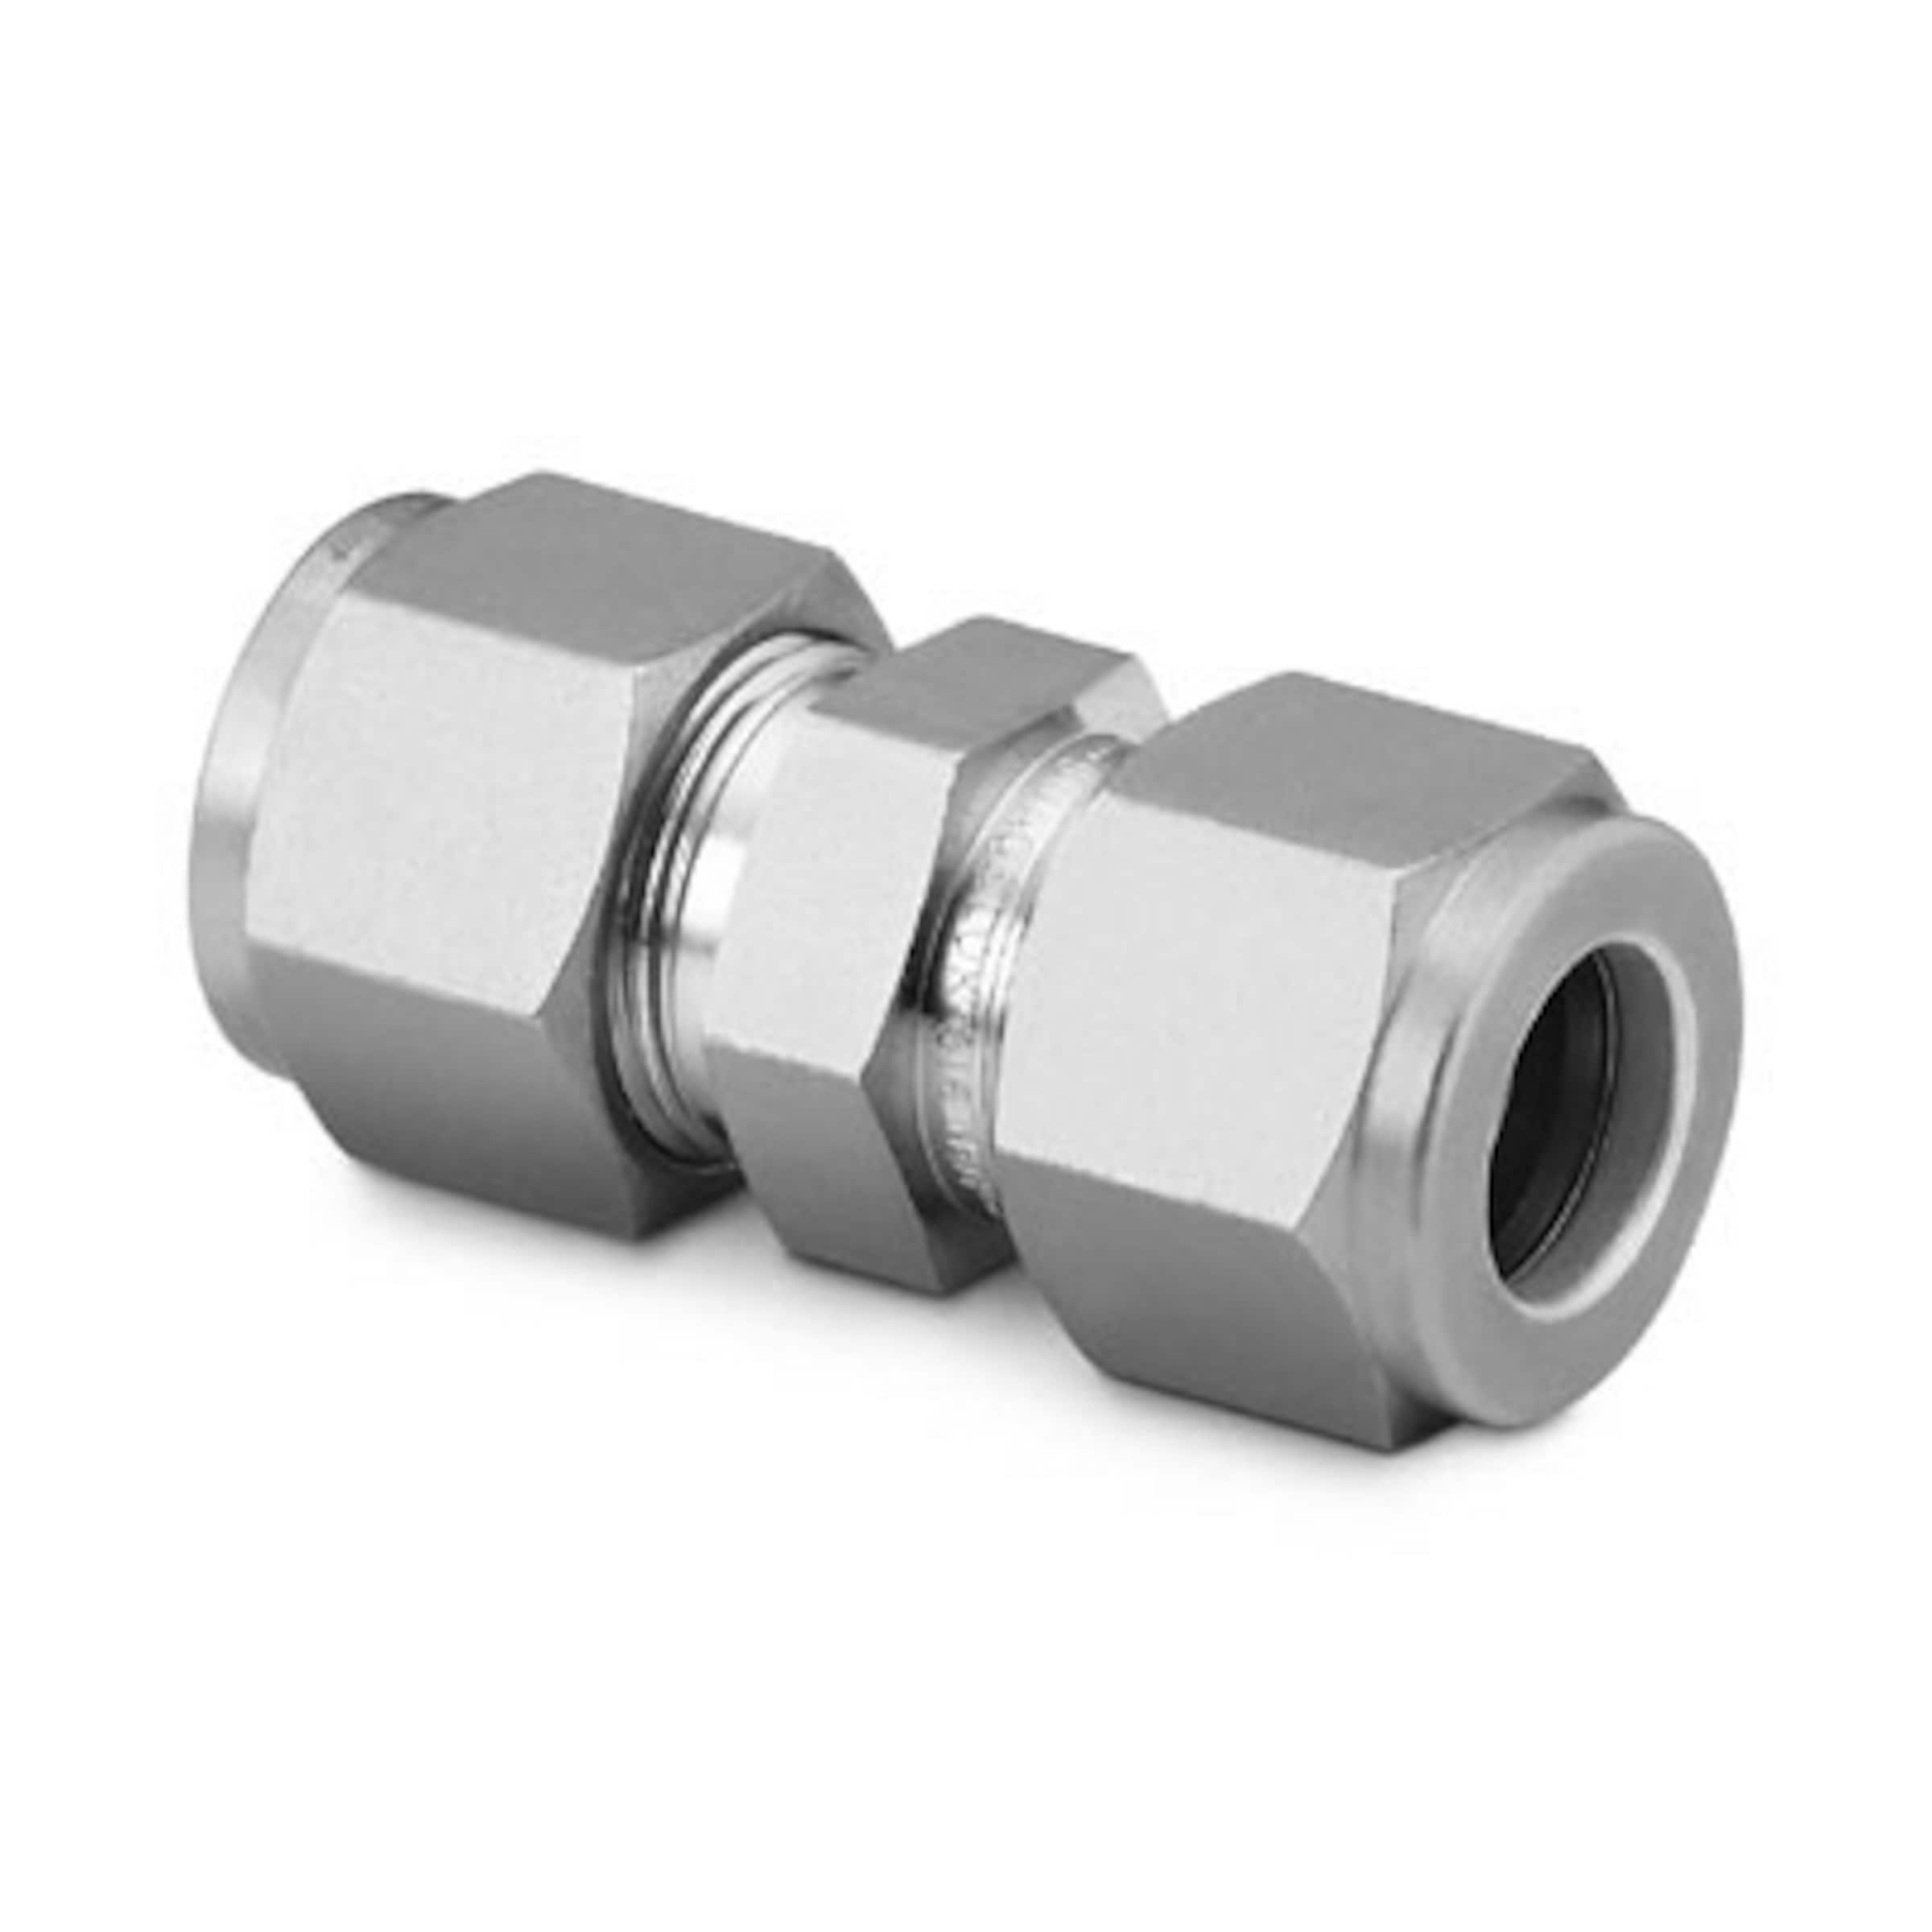 Stainless Steel Swagelok Tube Fitting, Union, 3/4 in. Tube OD, Unions, Tube Fittings and Adapters, Fittings, All Products